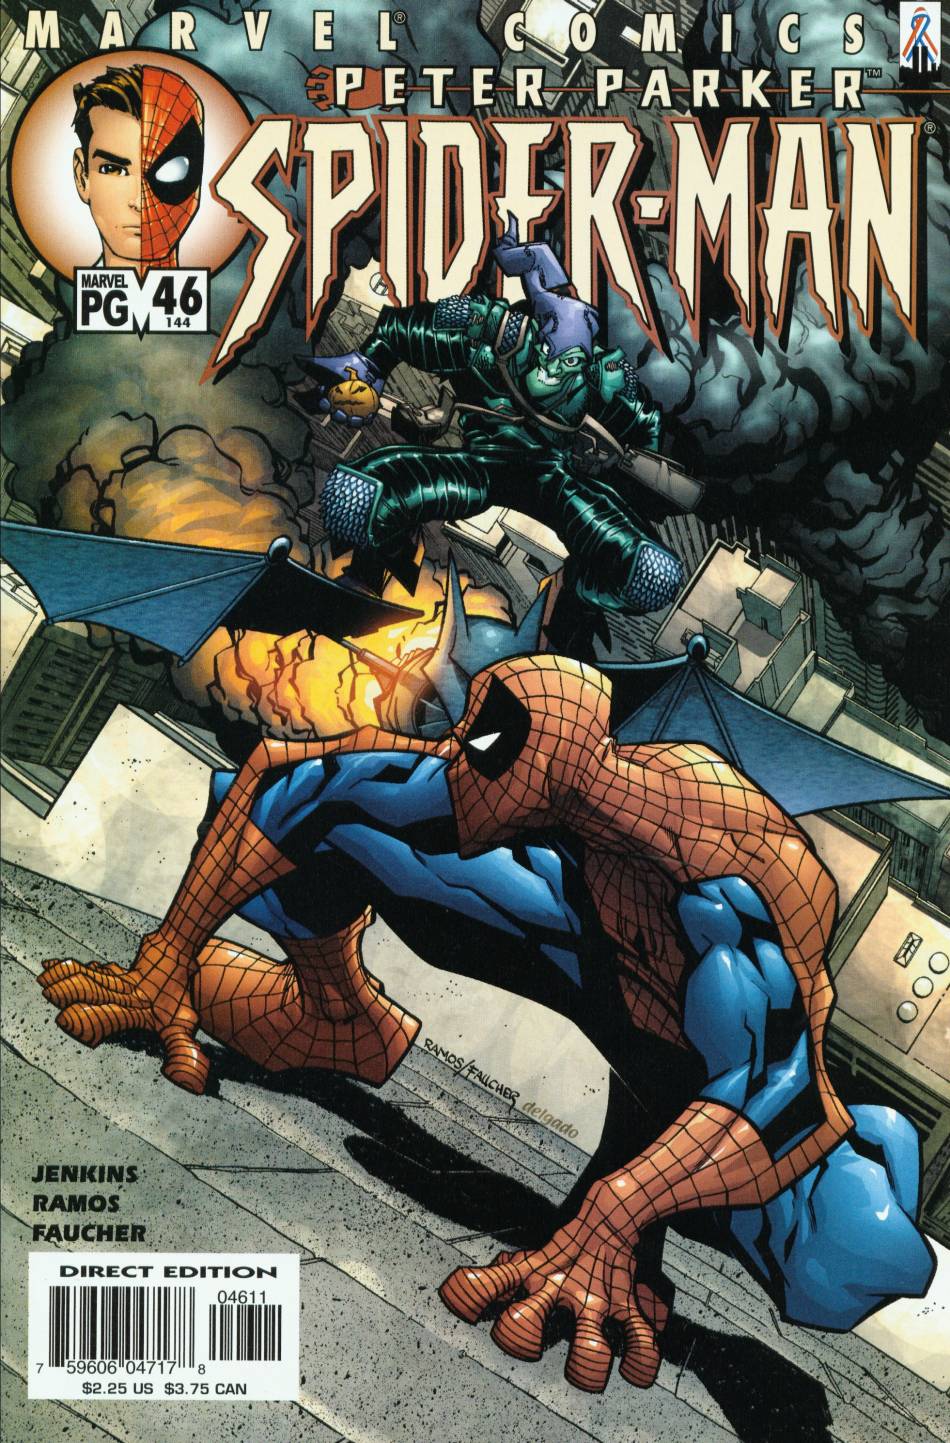 Read online Peter Parker: Spider-Man comic -  Issue #46 - 1